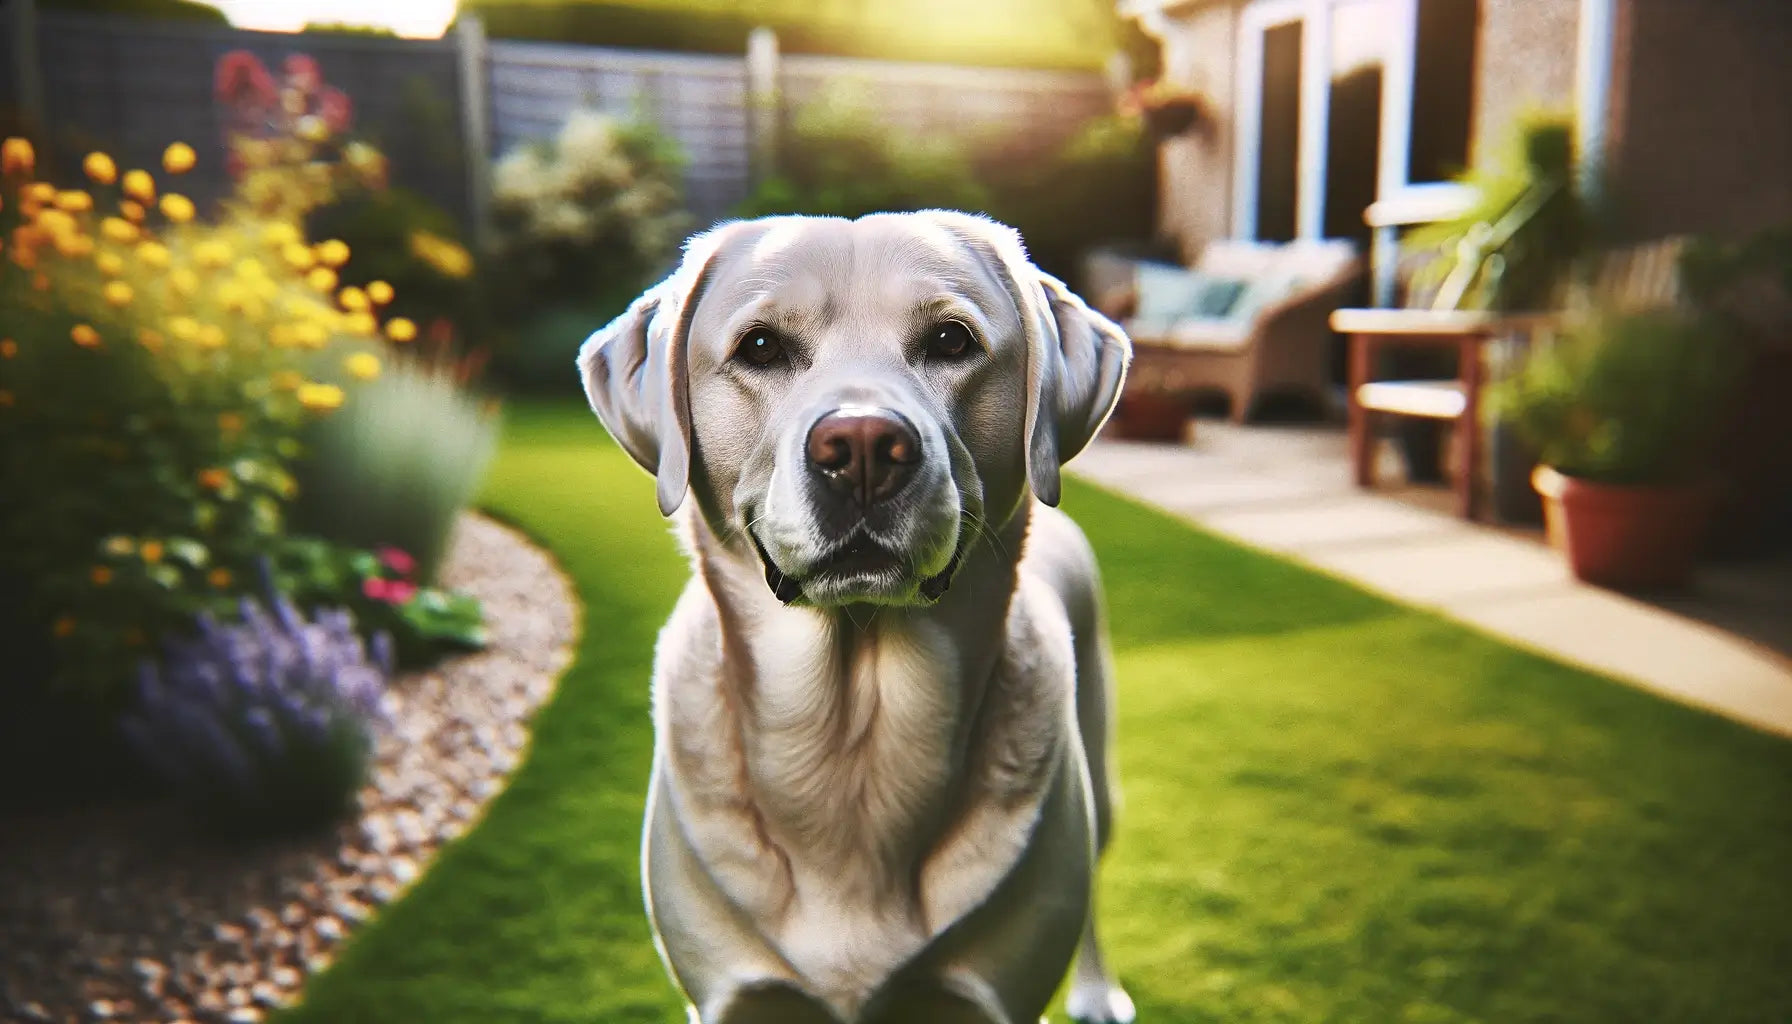 A Silver Lab standing in a yard, looking directly into the camera with a relaxed and happy expression.